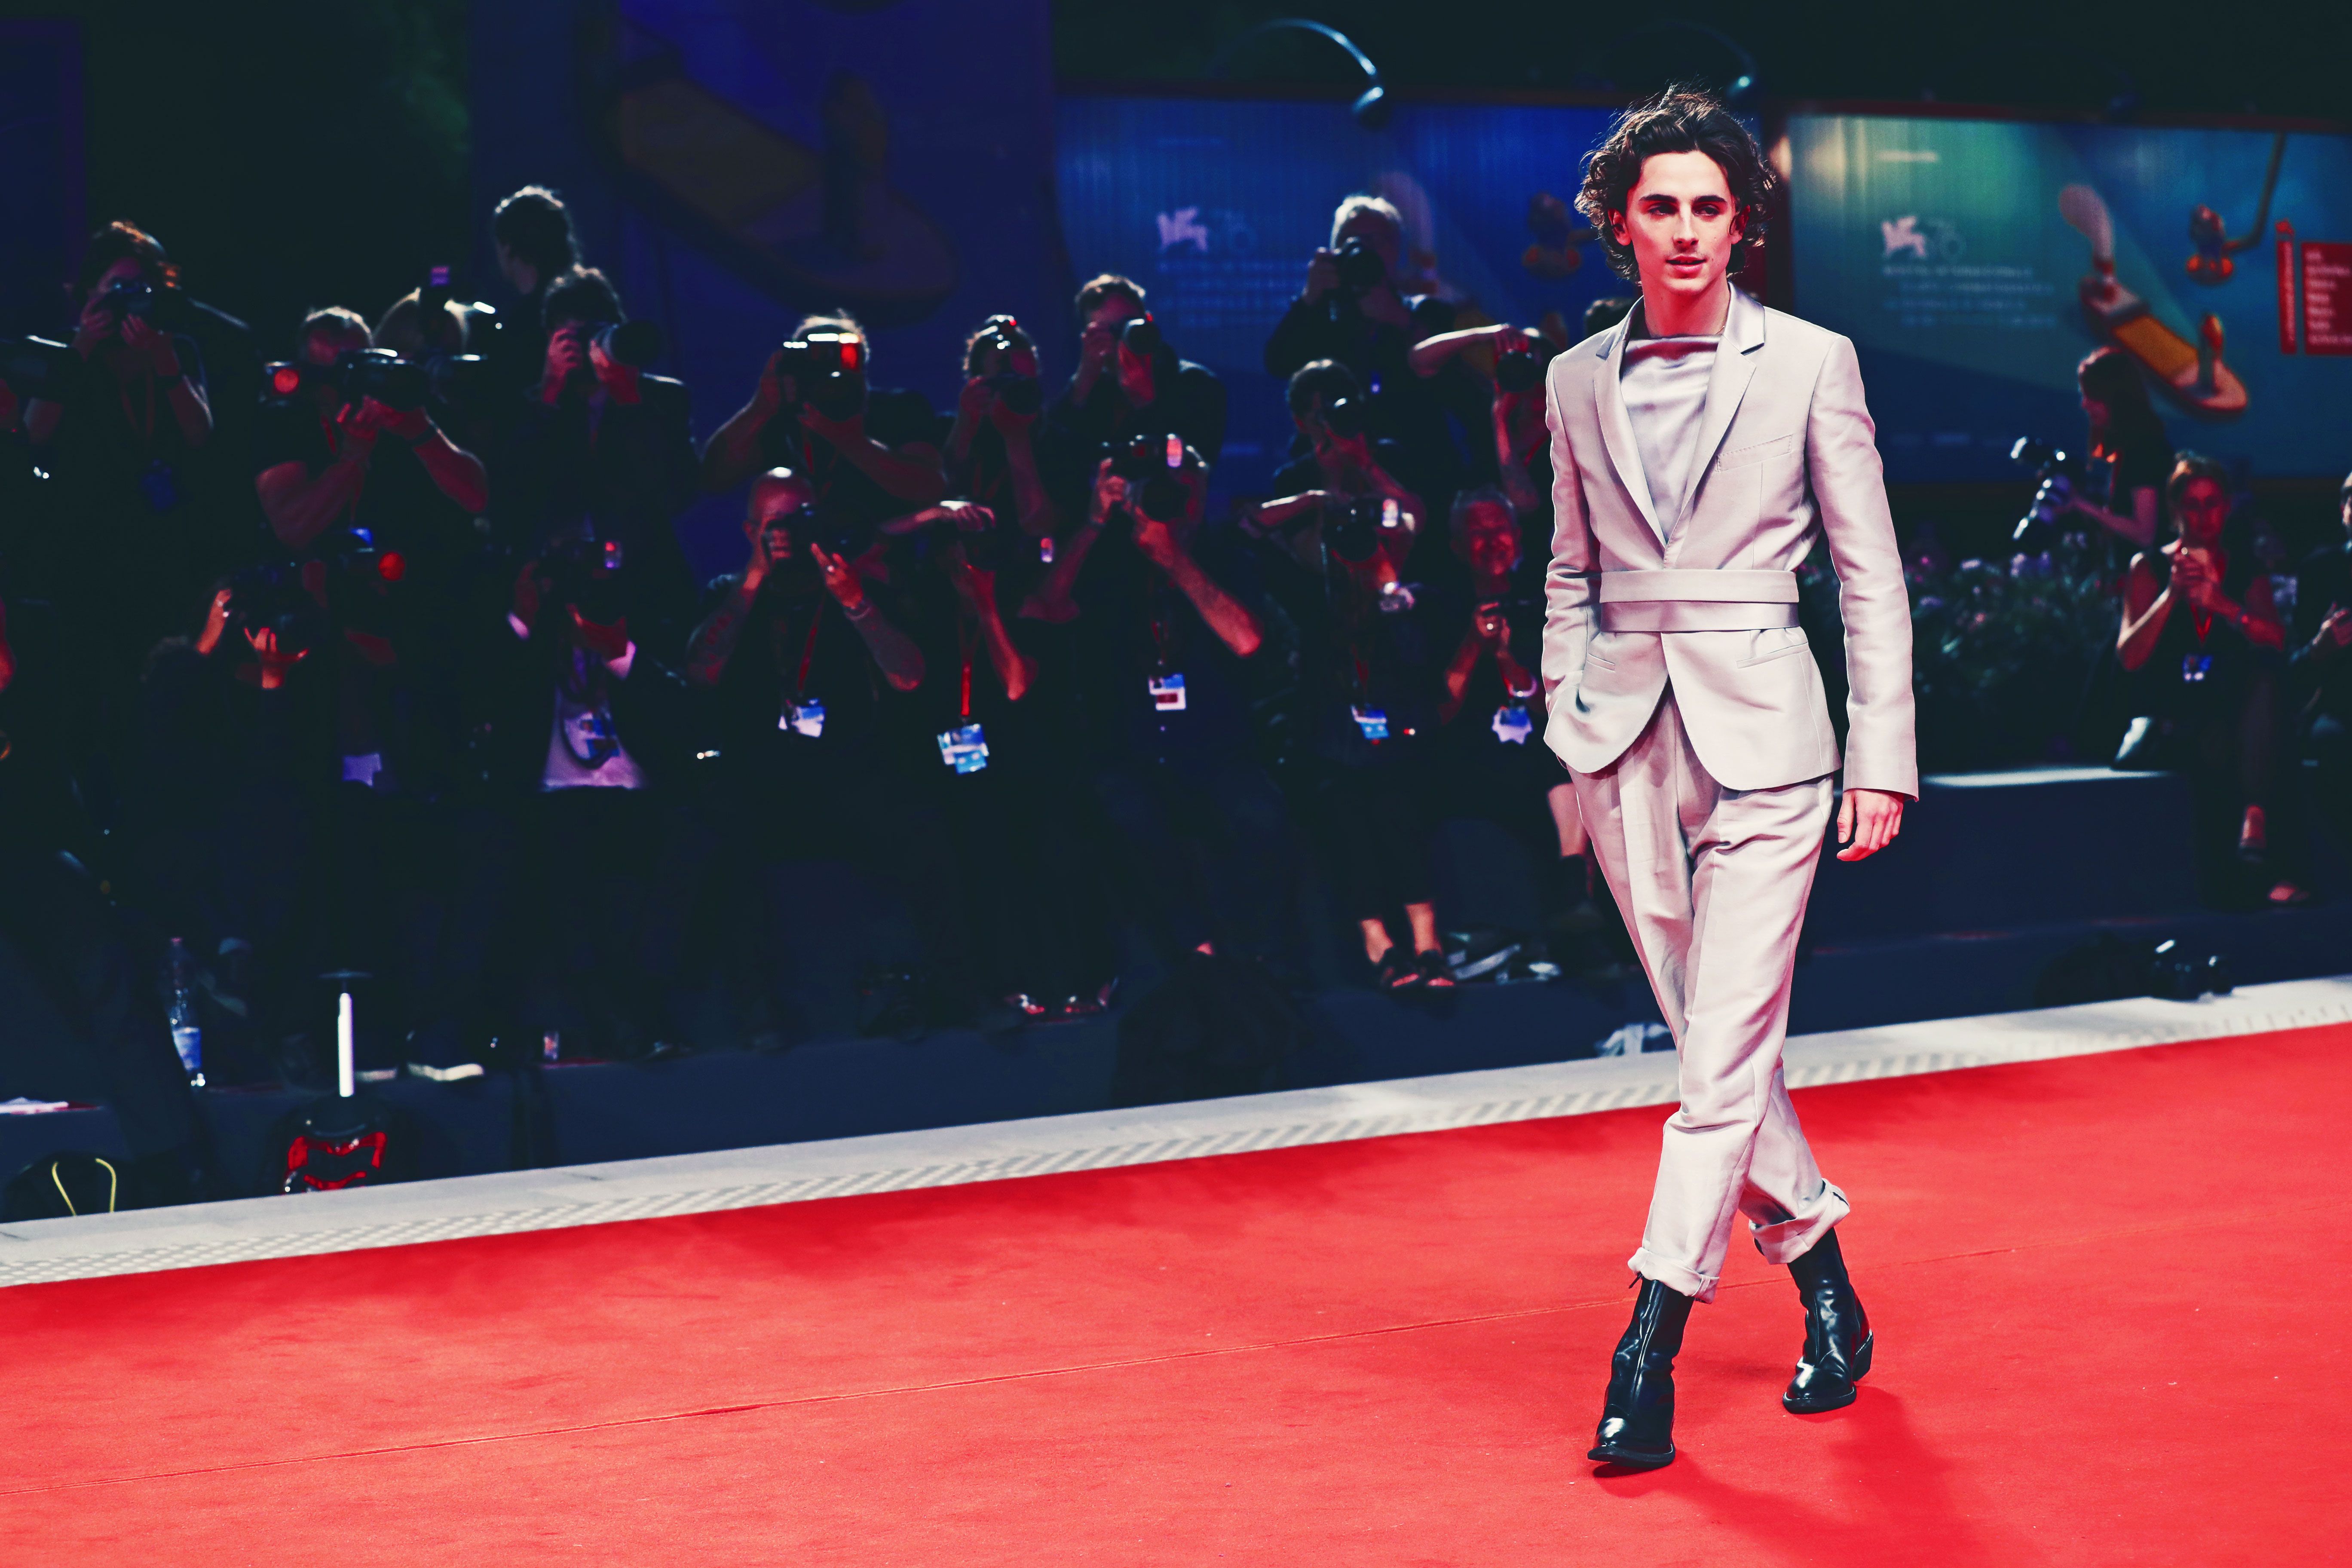 King of the suit? Timothée Chalamet on the red carpet, every time - Vogue  Australia